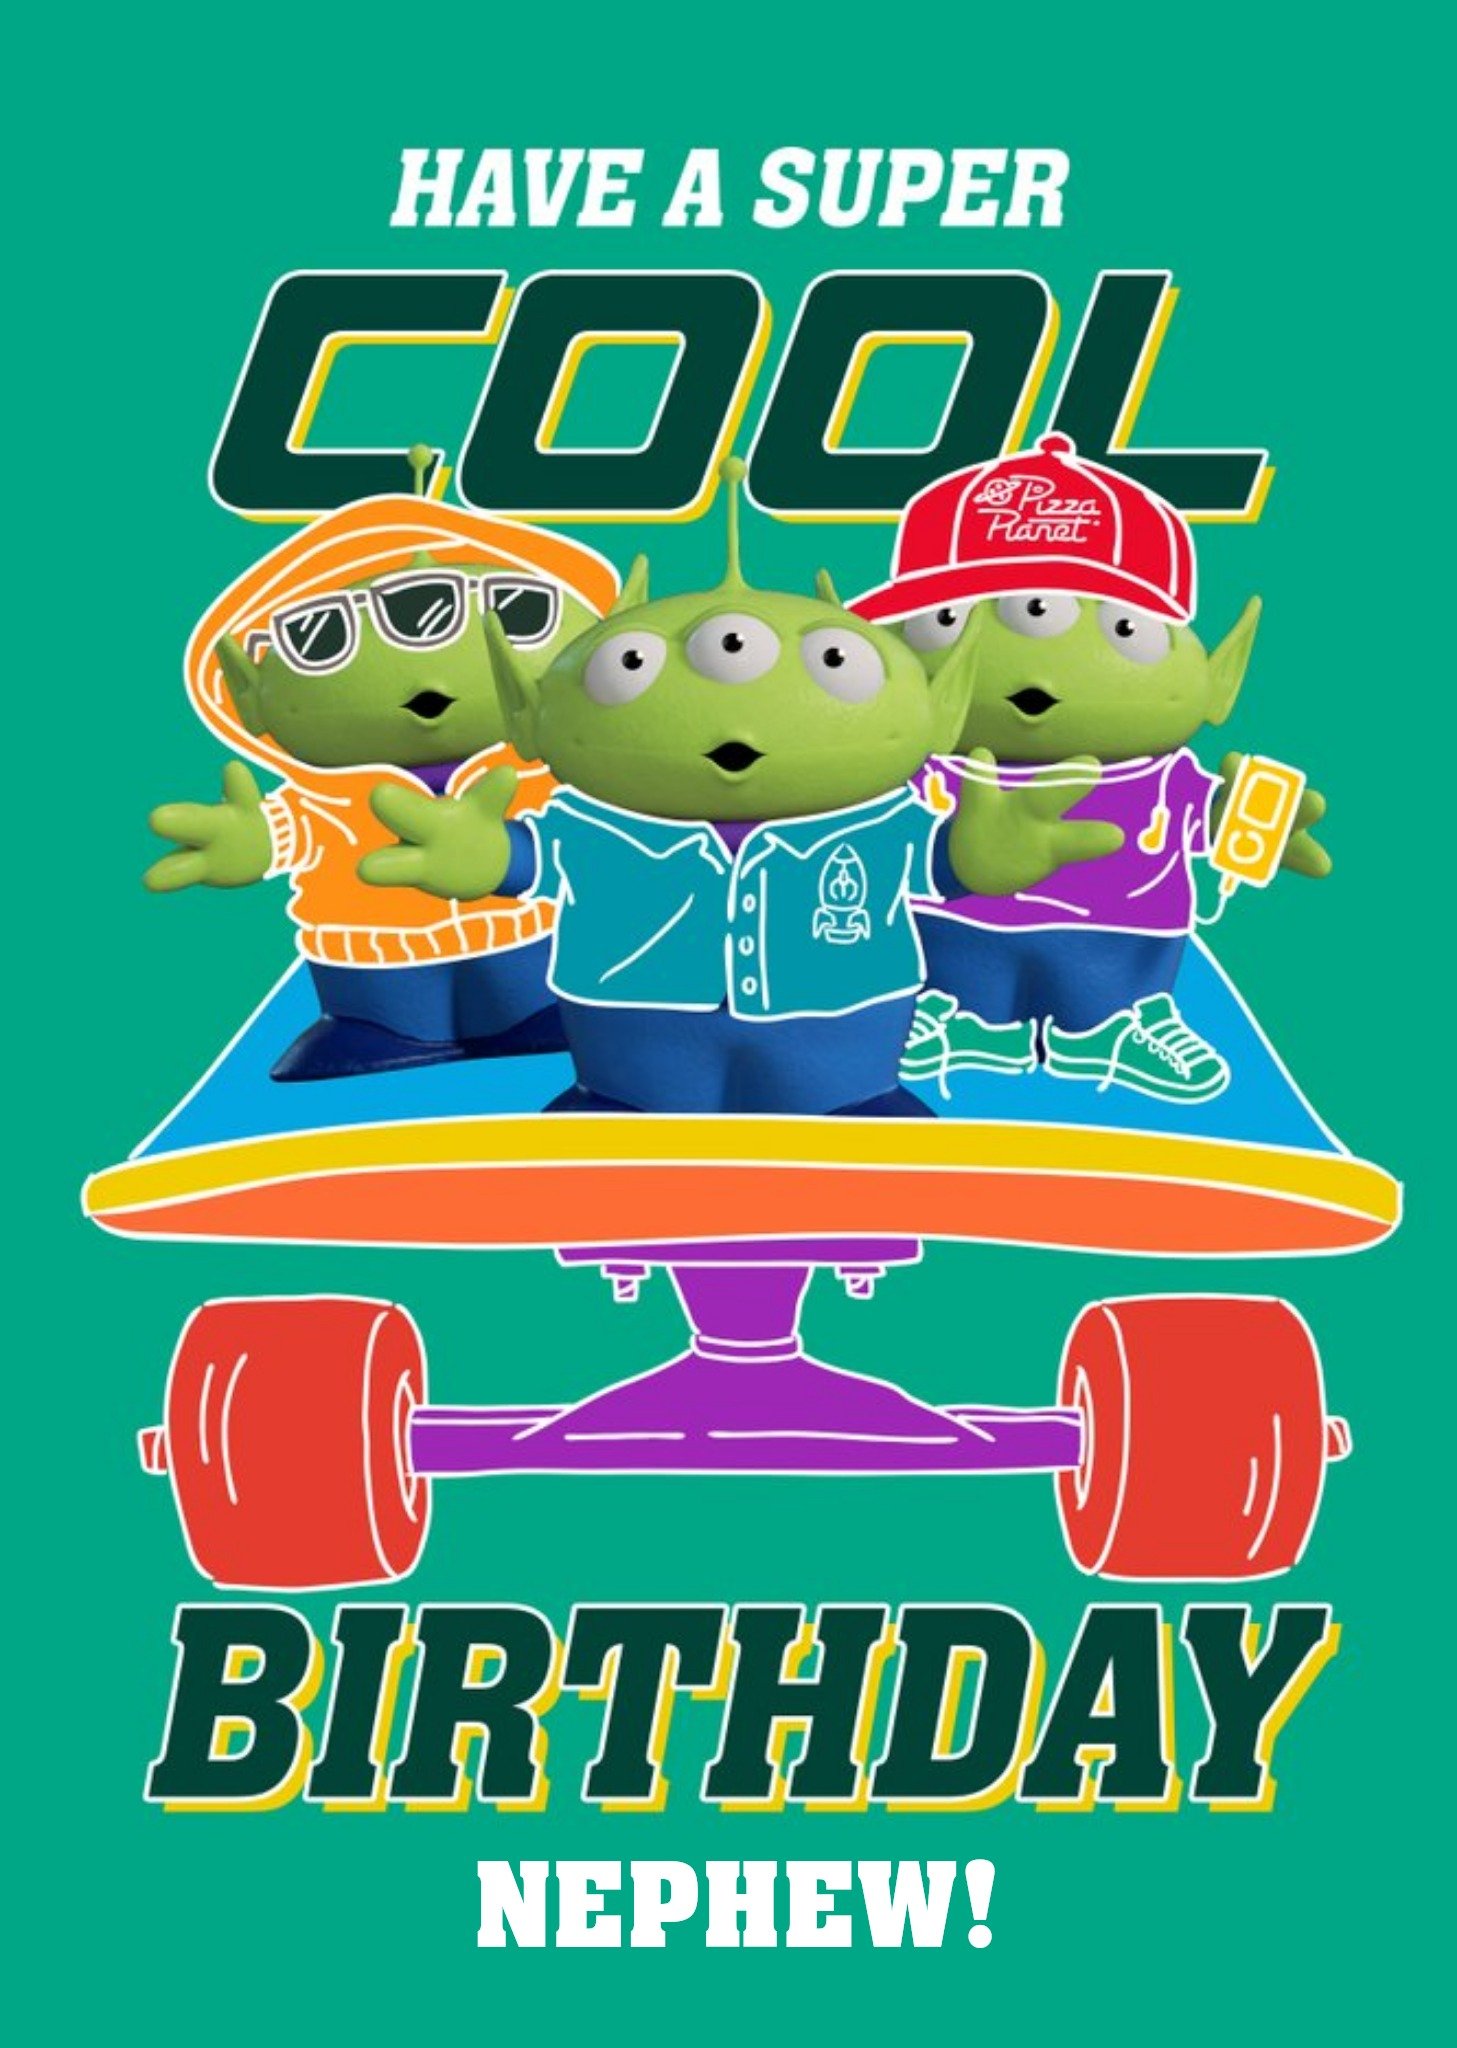 Disney Toy Story Alien Character Have A Super Cool Birthday Card Ecard